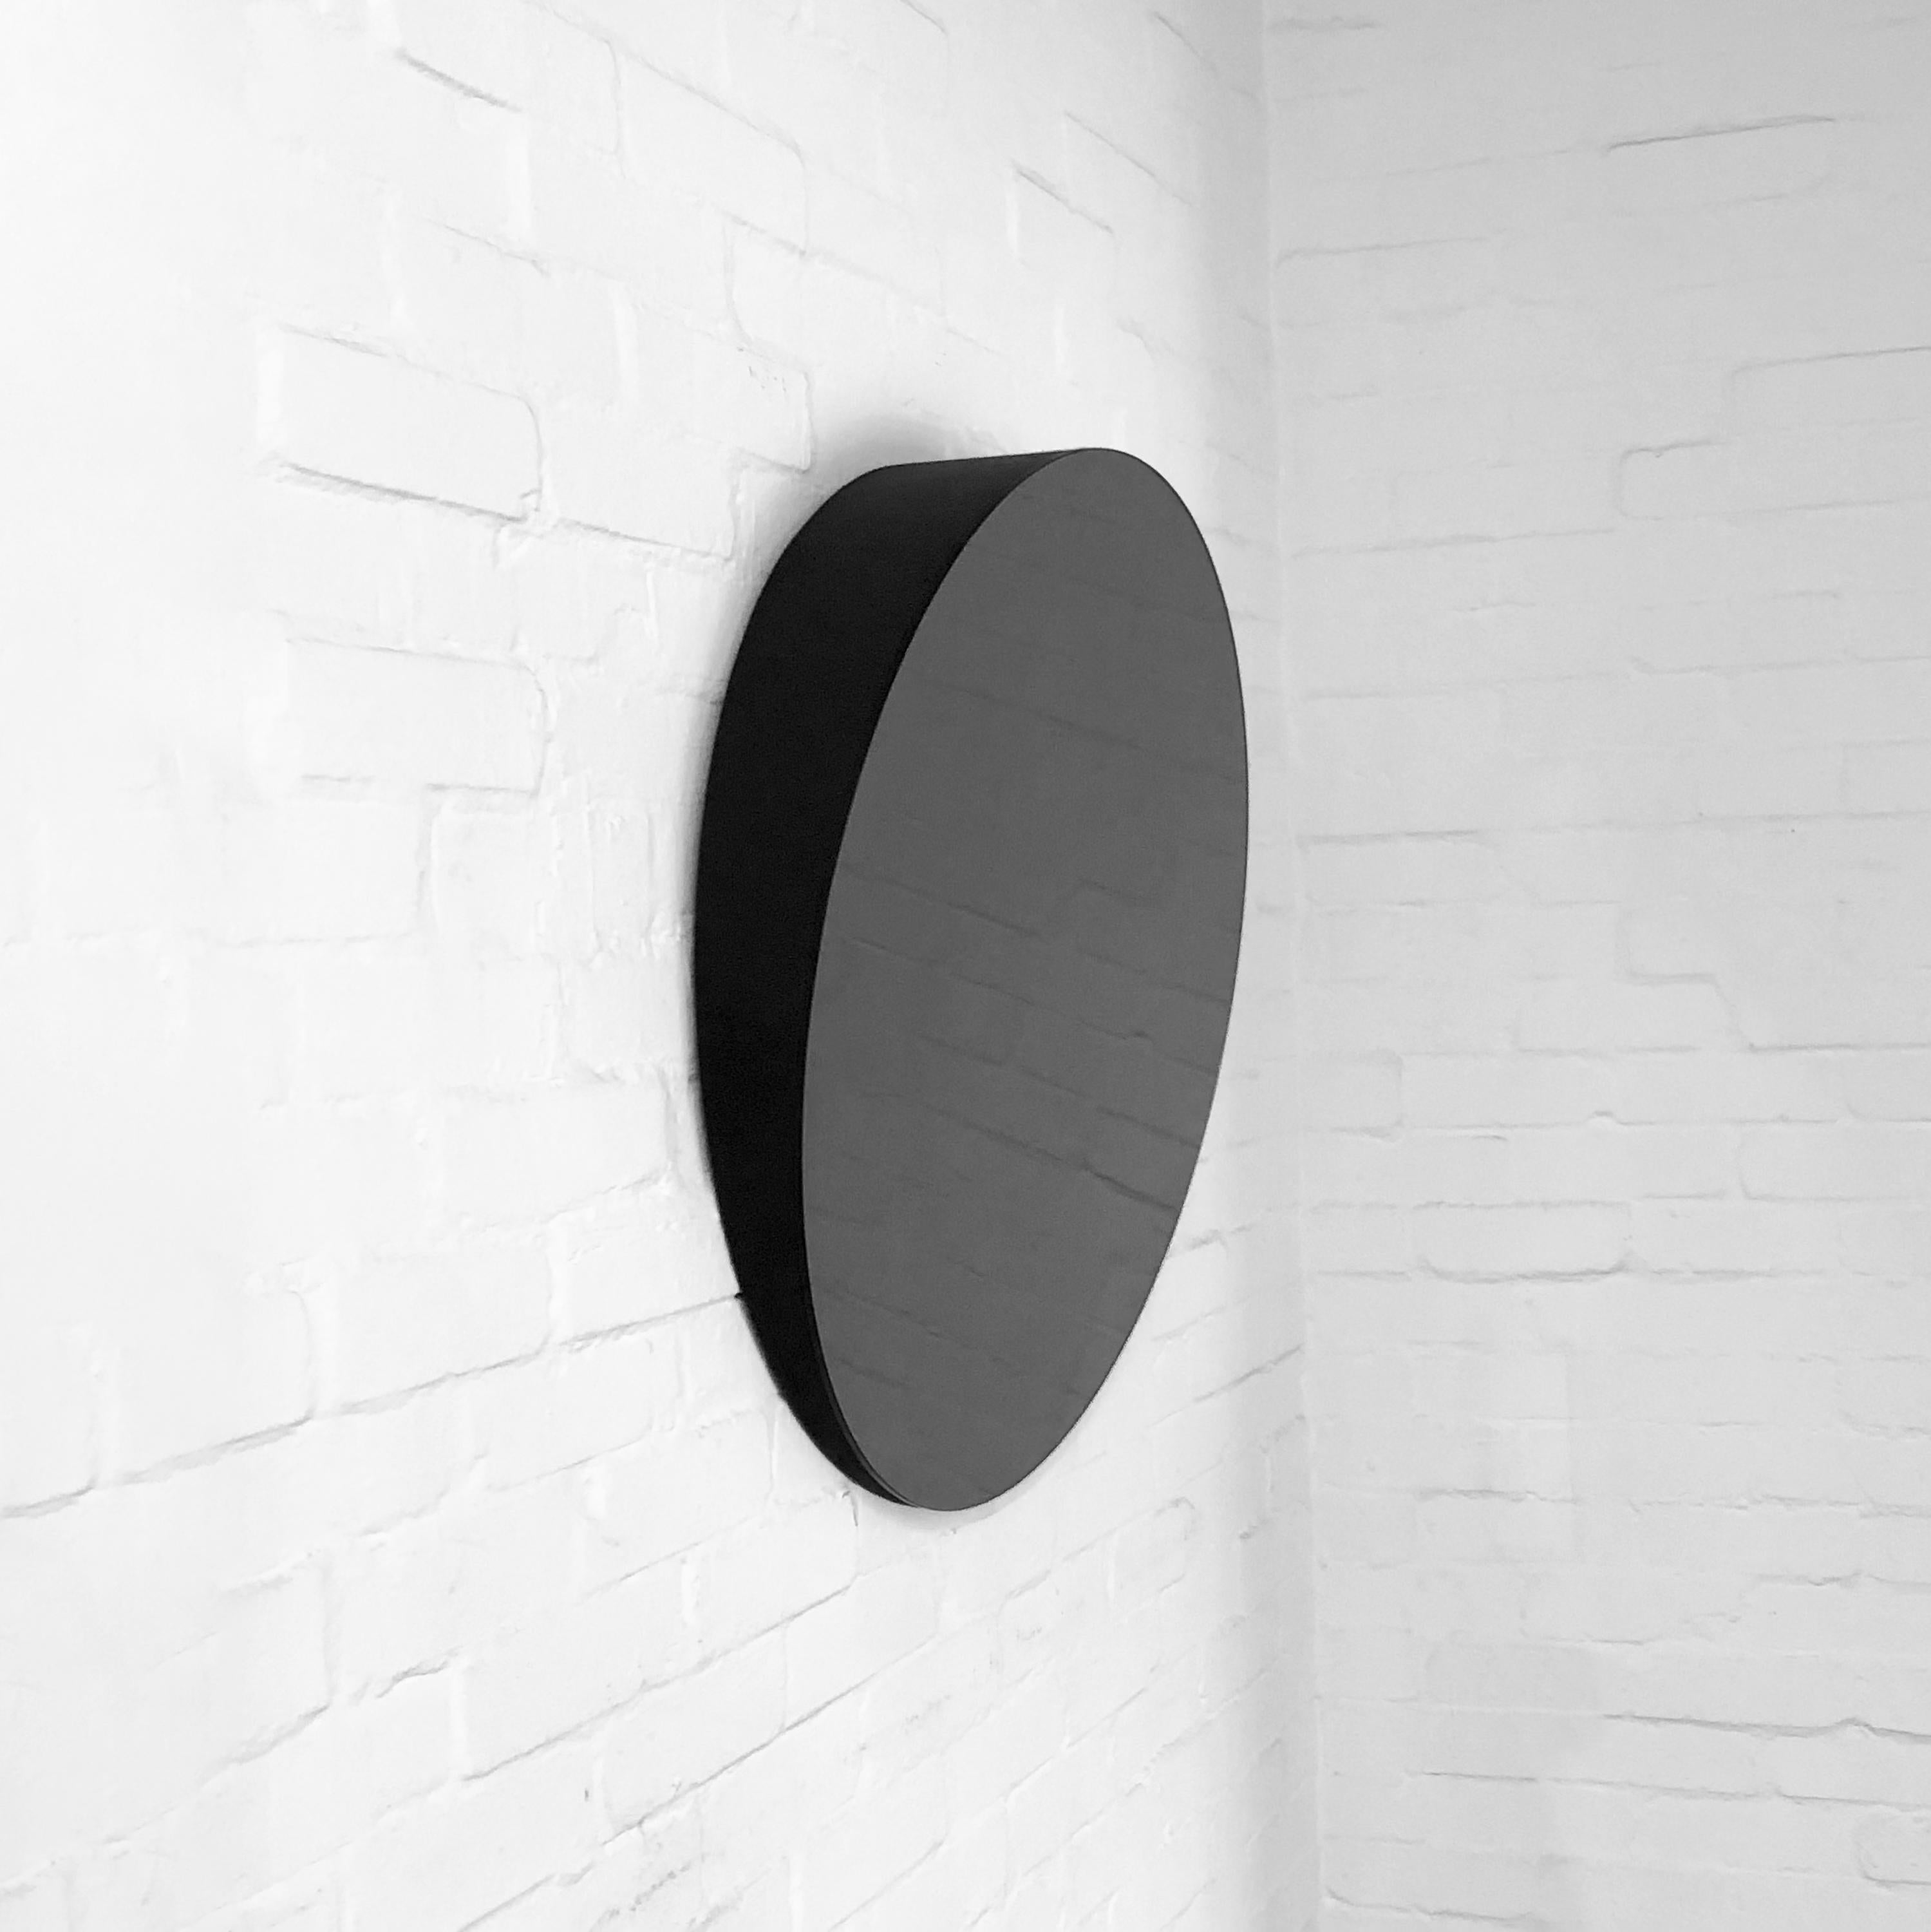 Minimalist black tinted round frameless mirror tilted 10 degrees. Designed and made in London, UK.

Fabricated with a painted MDF backing and incorporated French Cleat System (split batten) so that the mirror may hang perfectly flush with the